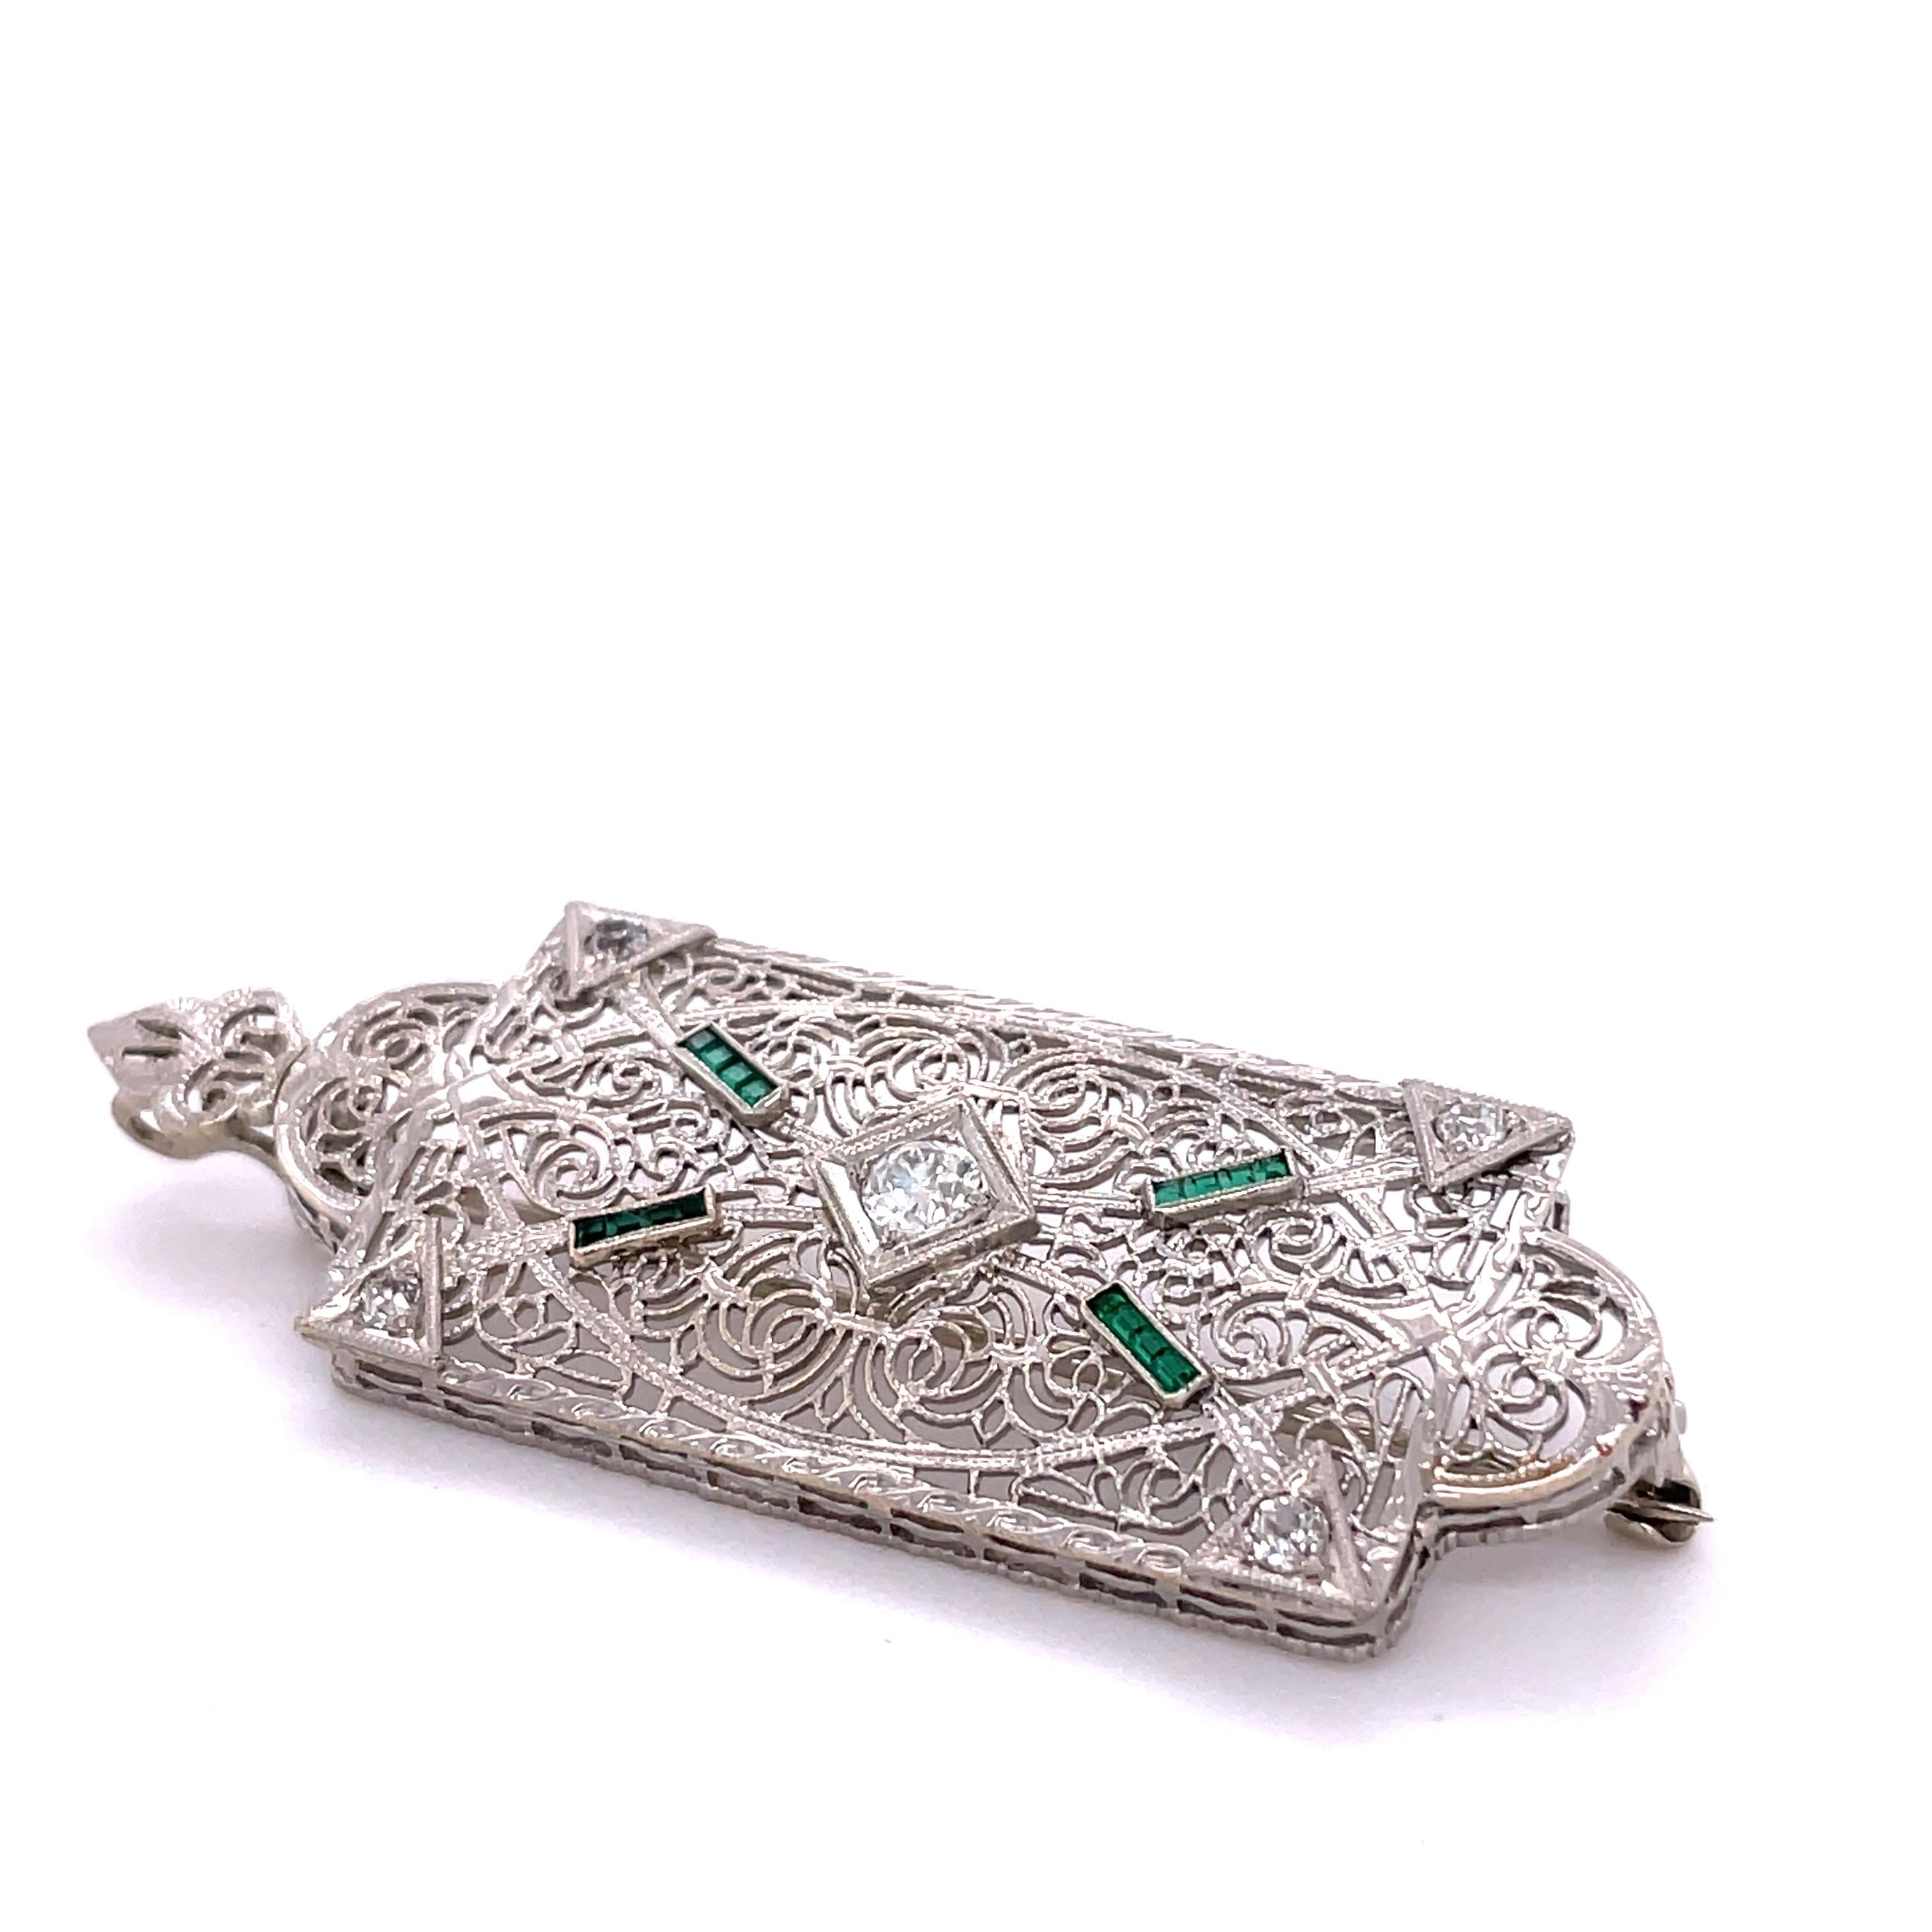 Baguette Cut 14K White Gold Art Deco Diamond and Emerald Pendant and Brooch 'Convertible'